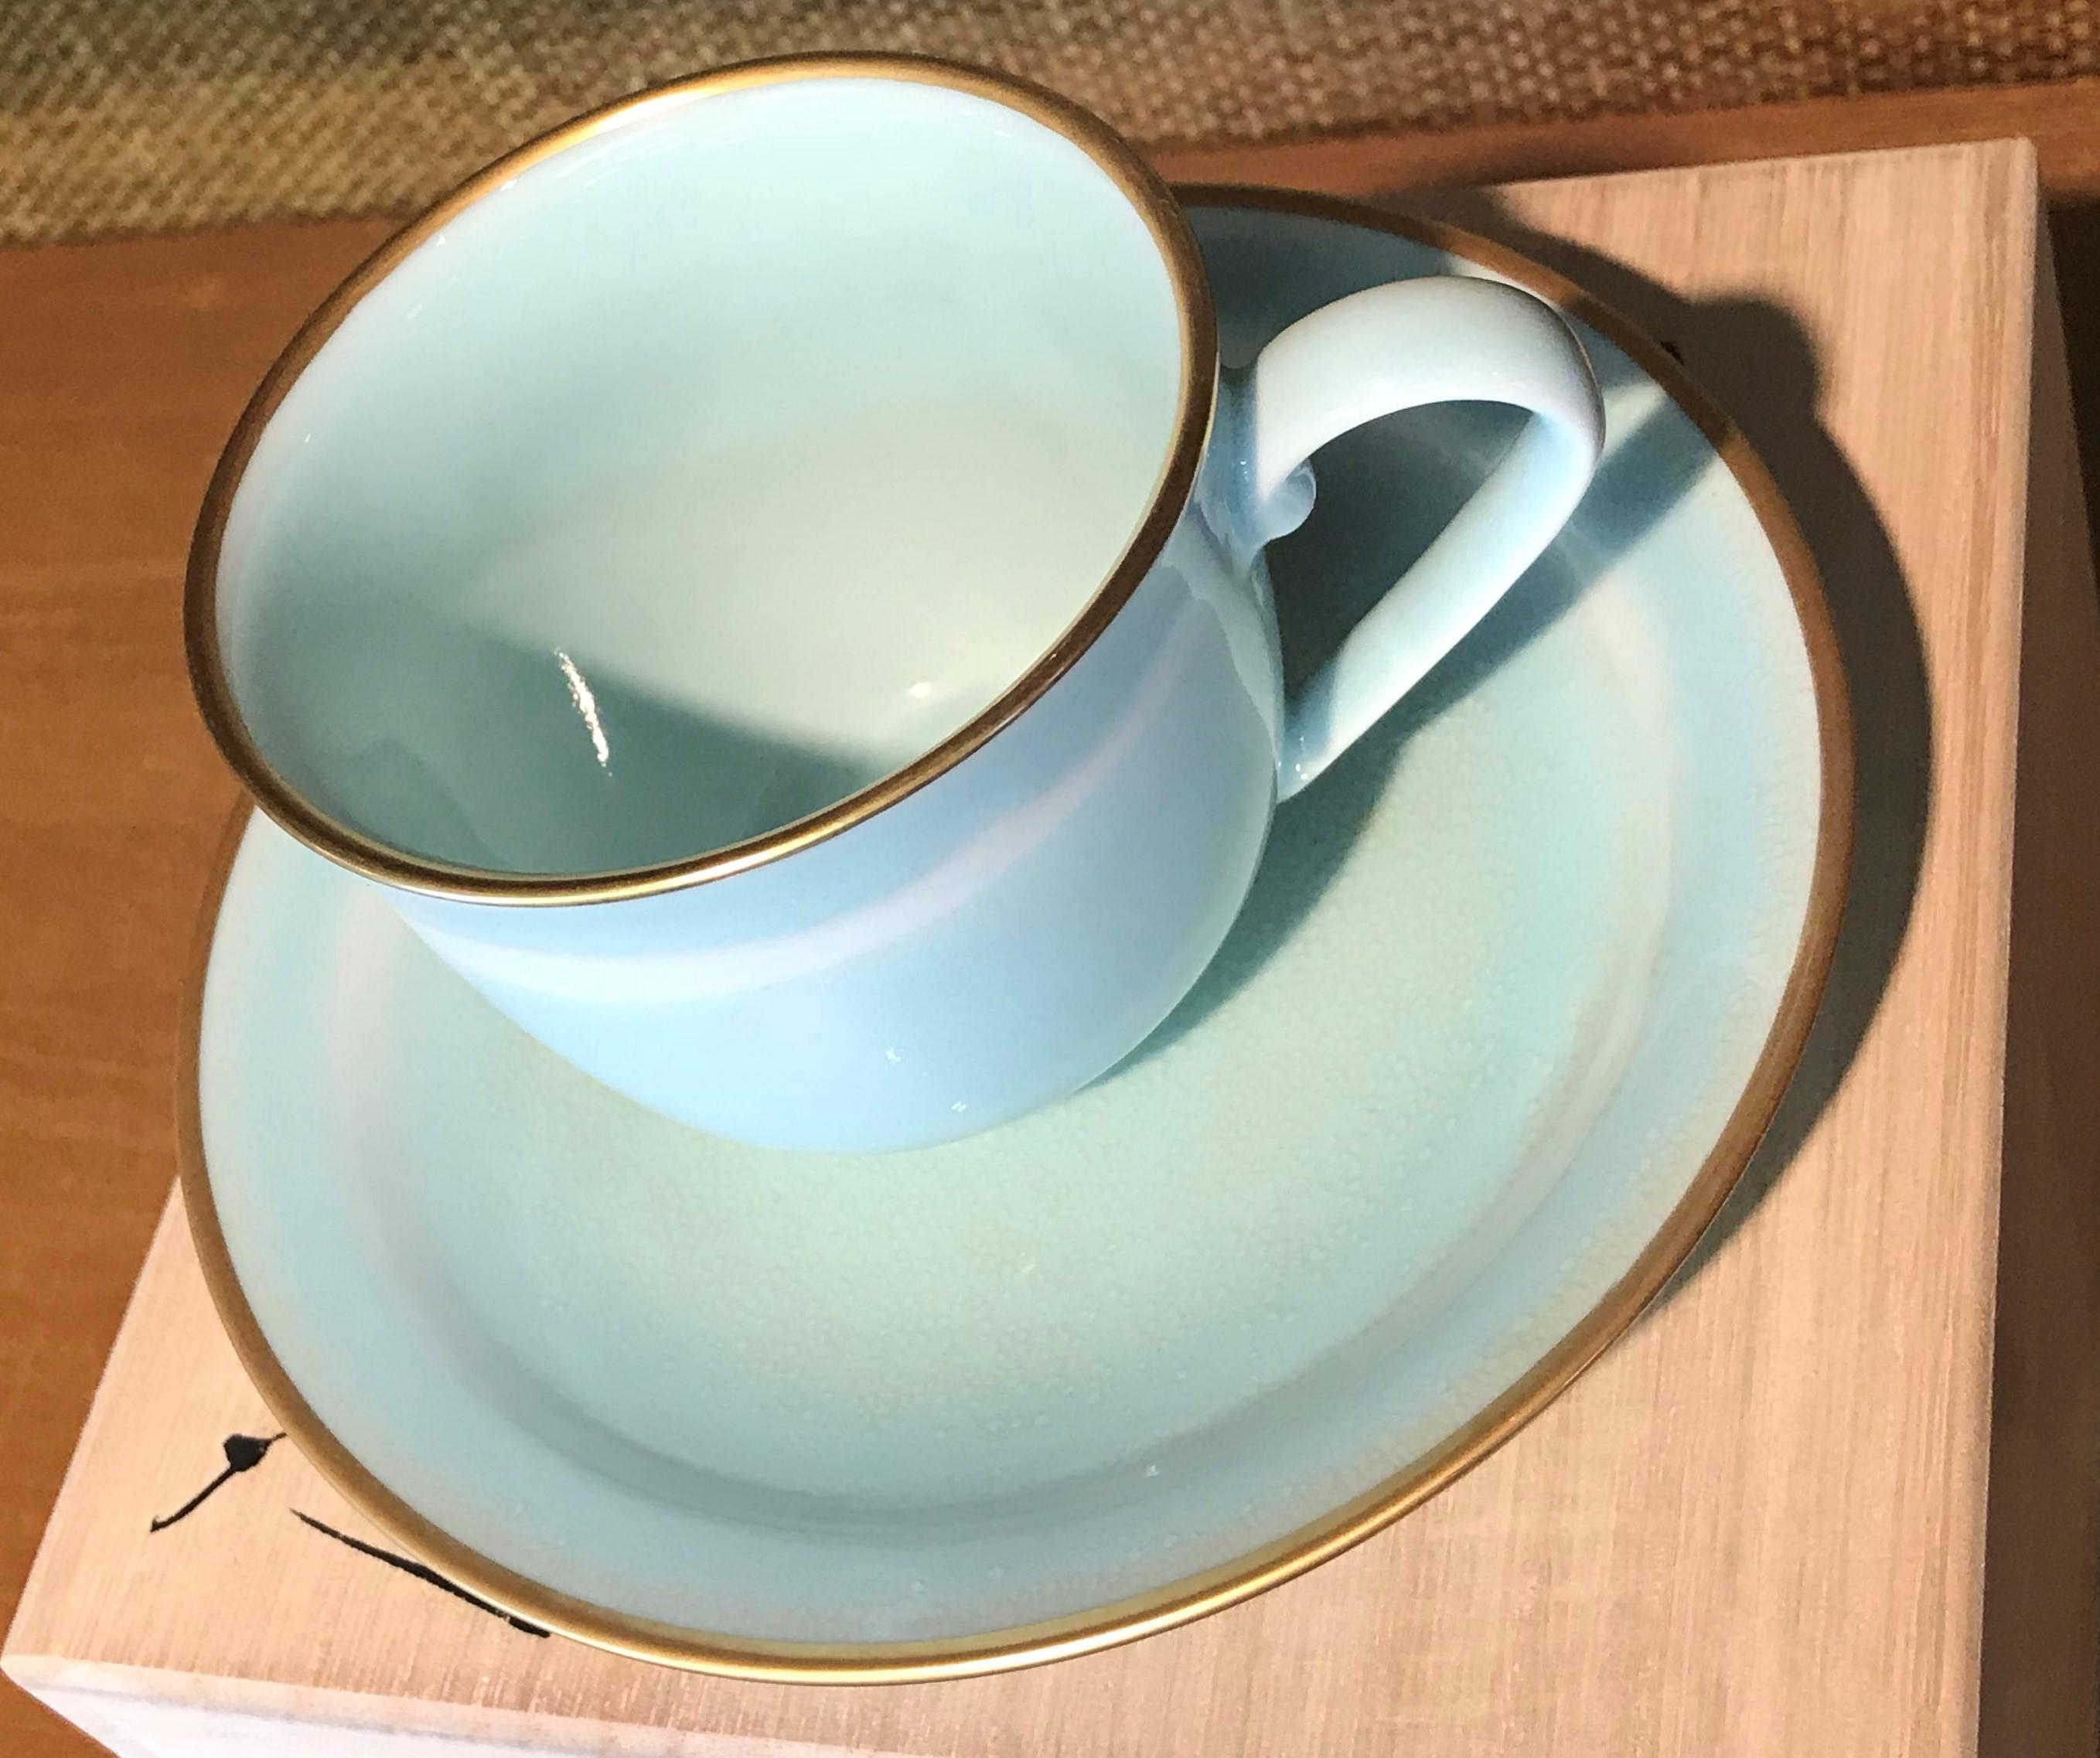 Hand-Painted Japanese Hand-Glazed Blue Porcelain Cup and Saucer by Contemporary Master Artist